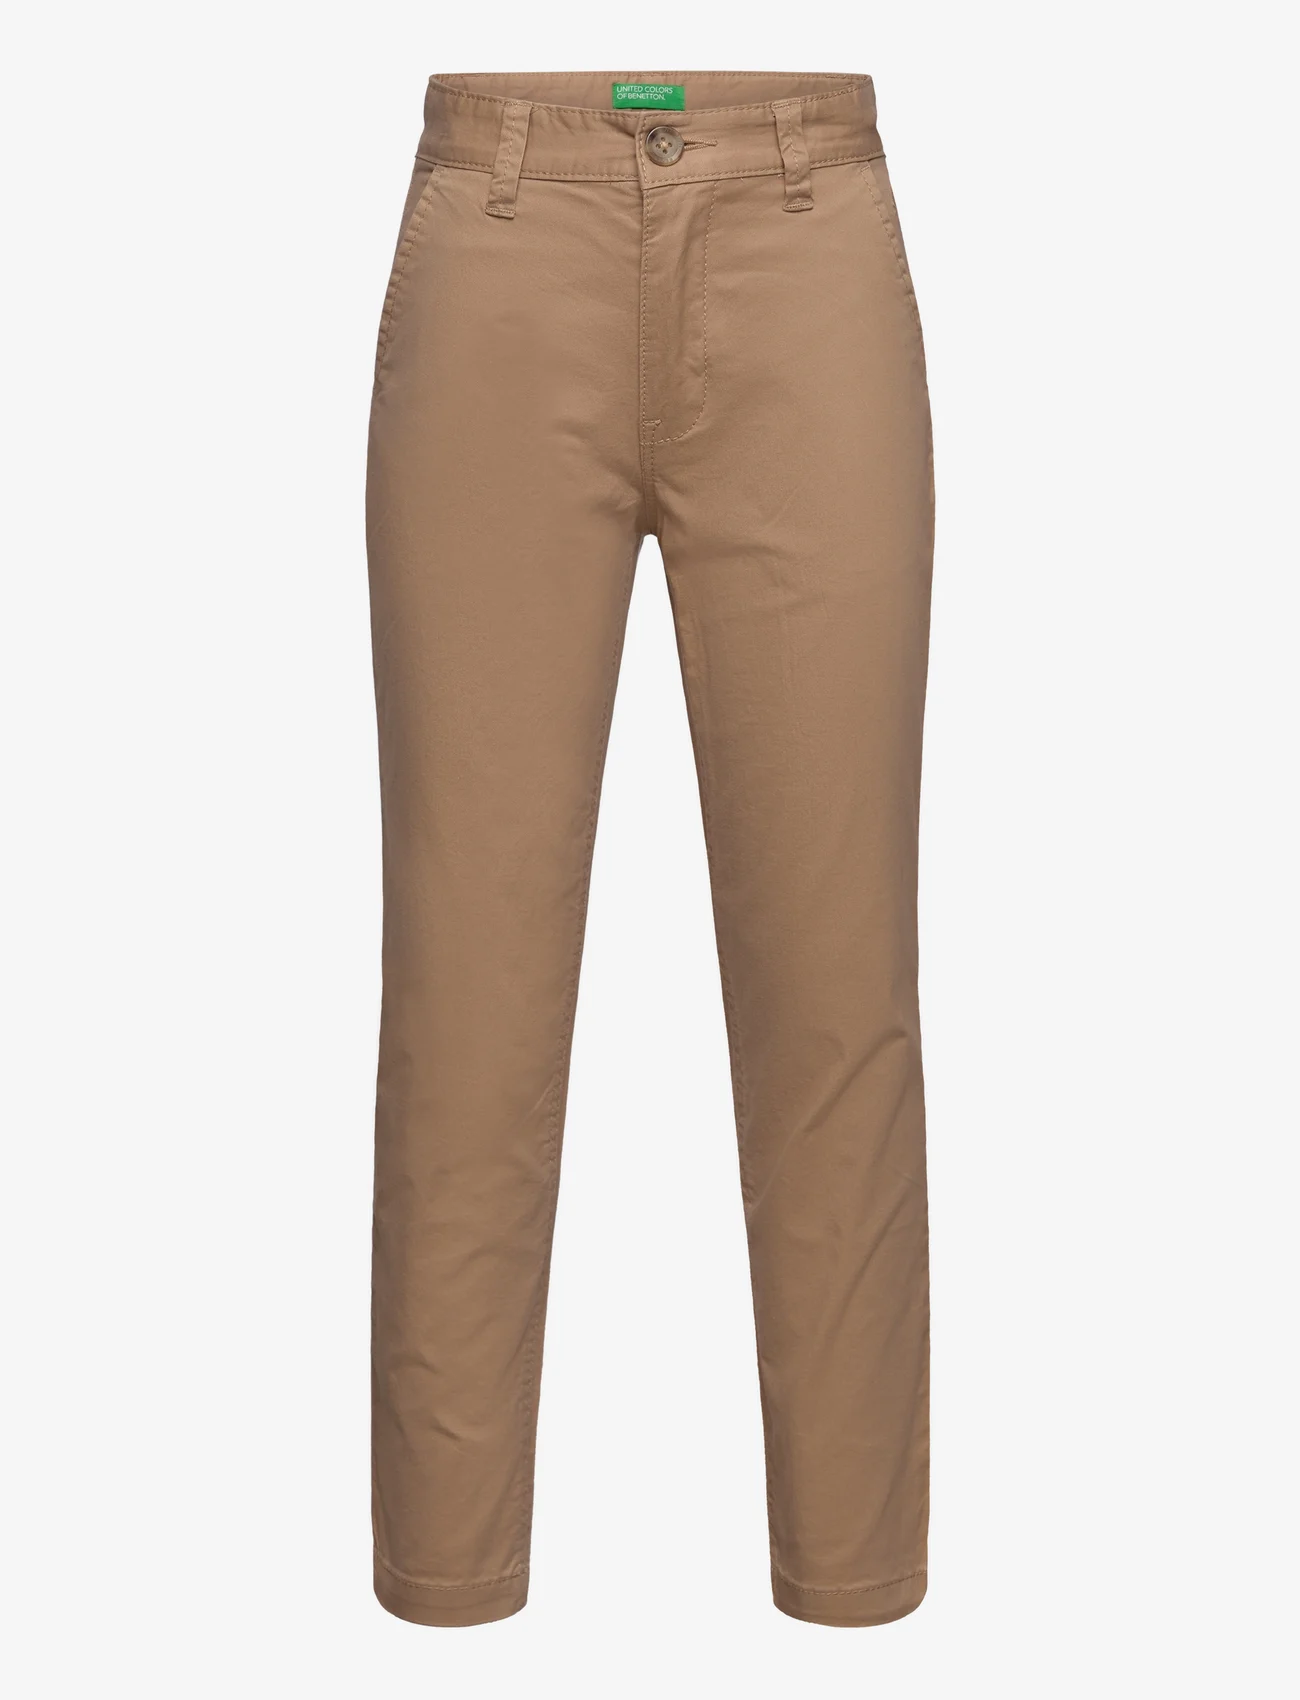 United Colors of Benetton - TROUSERS - sommerschnäppchen - camel - 0